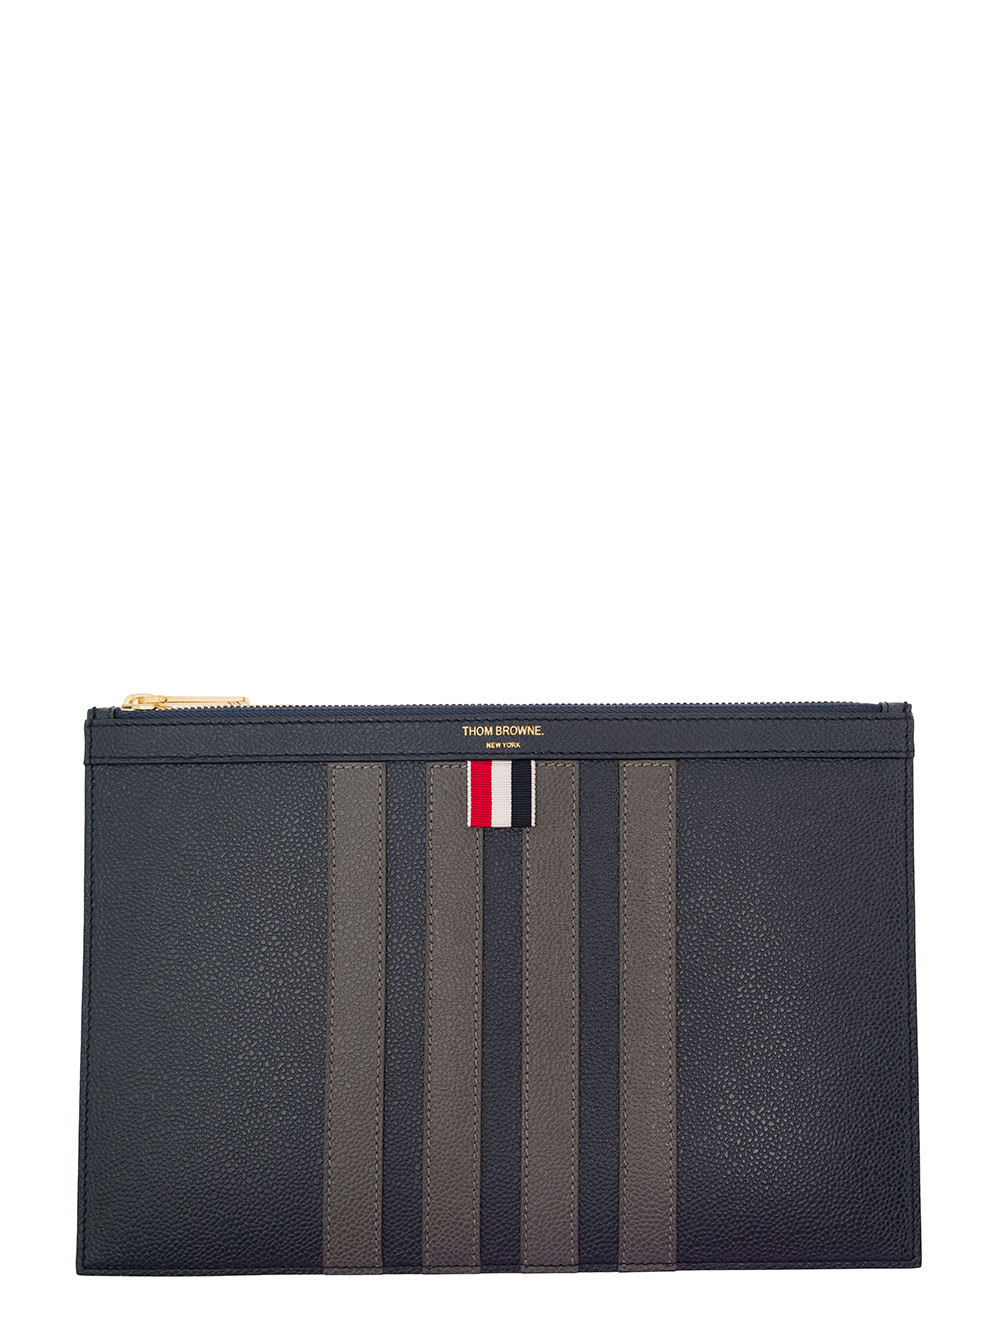 THOM BROWNE SMALL DOCUMENT HOLDER W/ 4 BAR IN PEBBLE GRAIN LEATHER